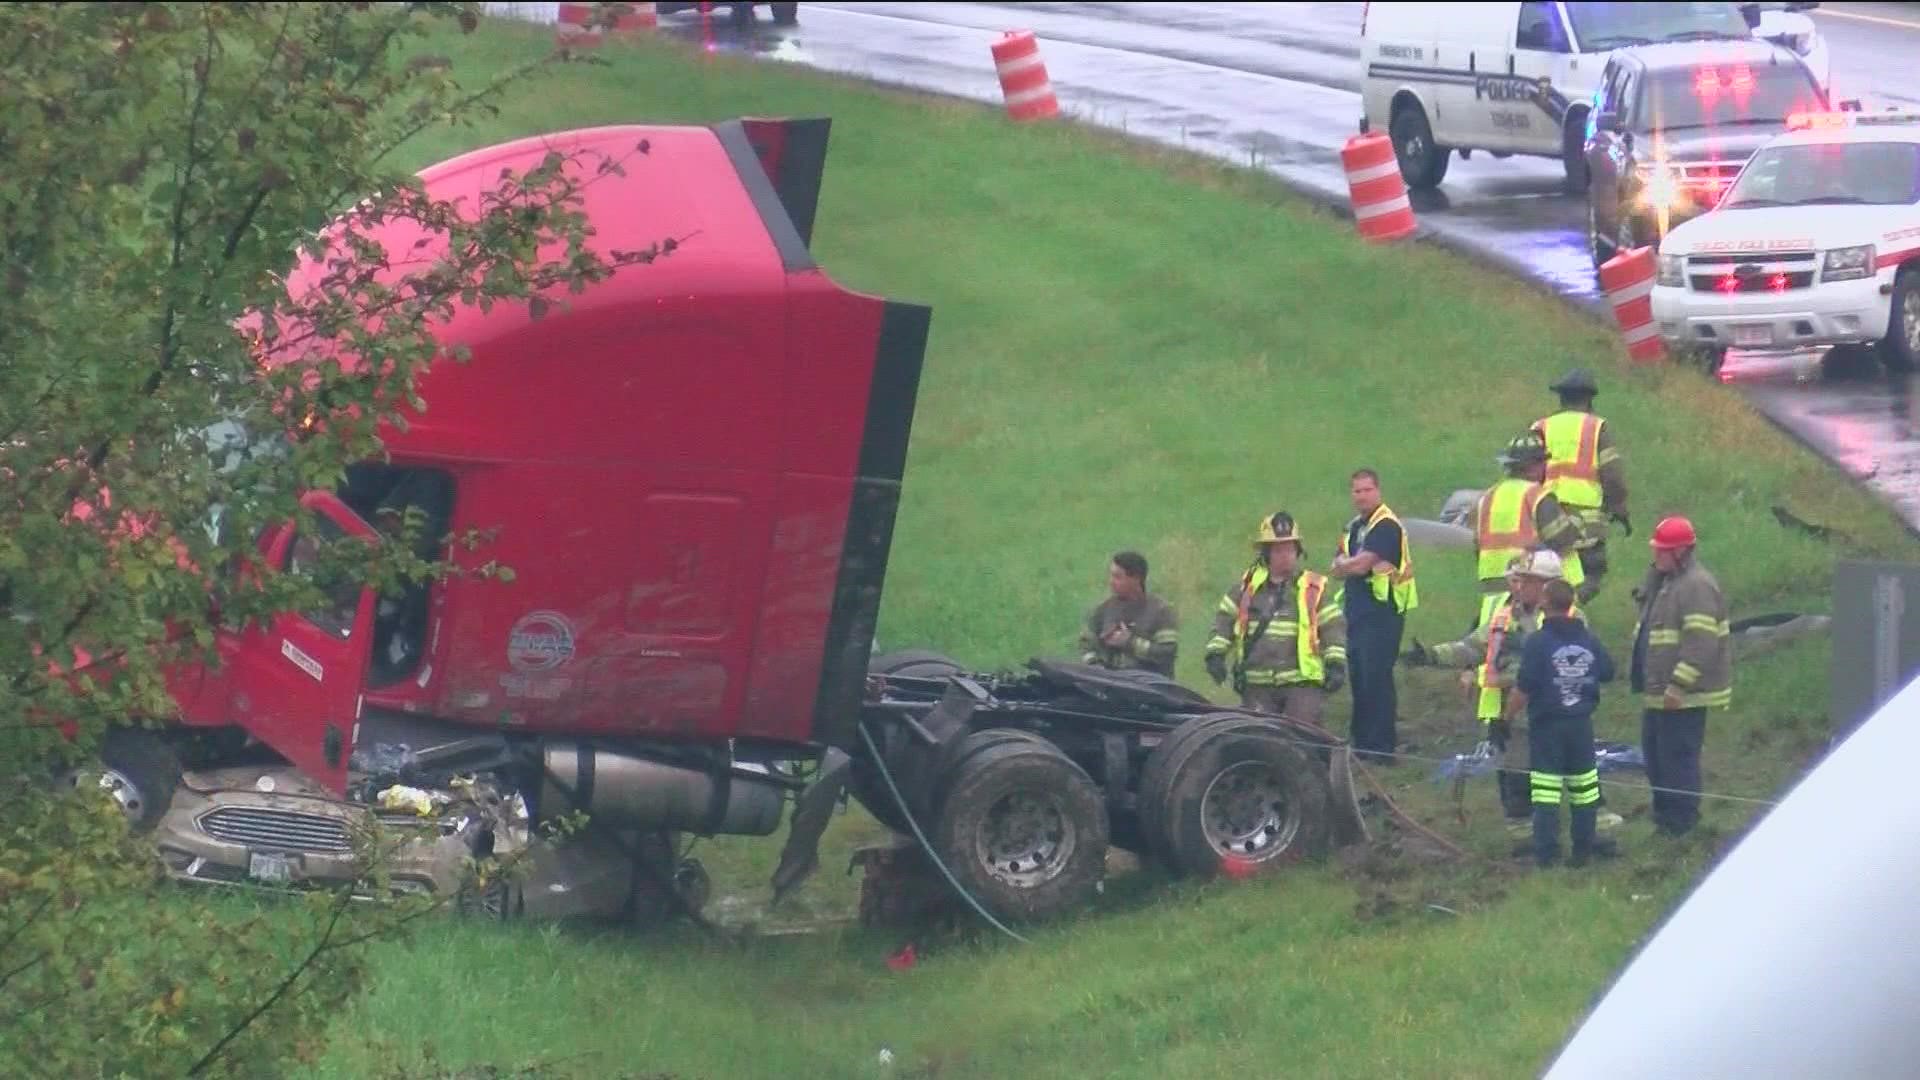 Authorities say the truck driver who caused a fatal crash on I-75 was watching a movie while driving.